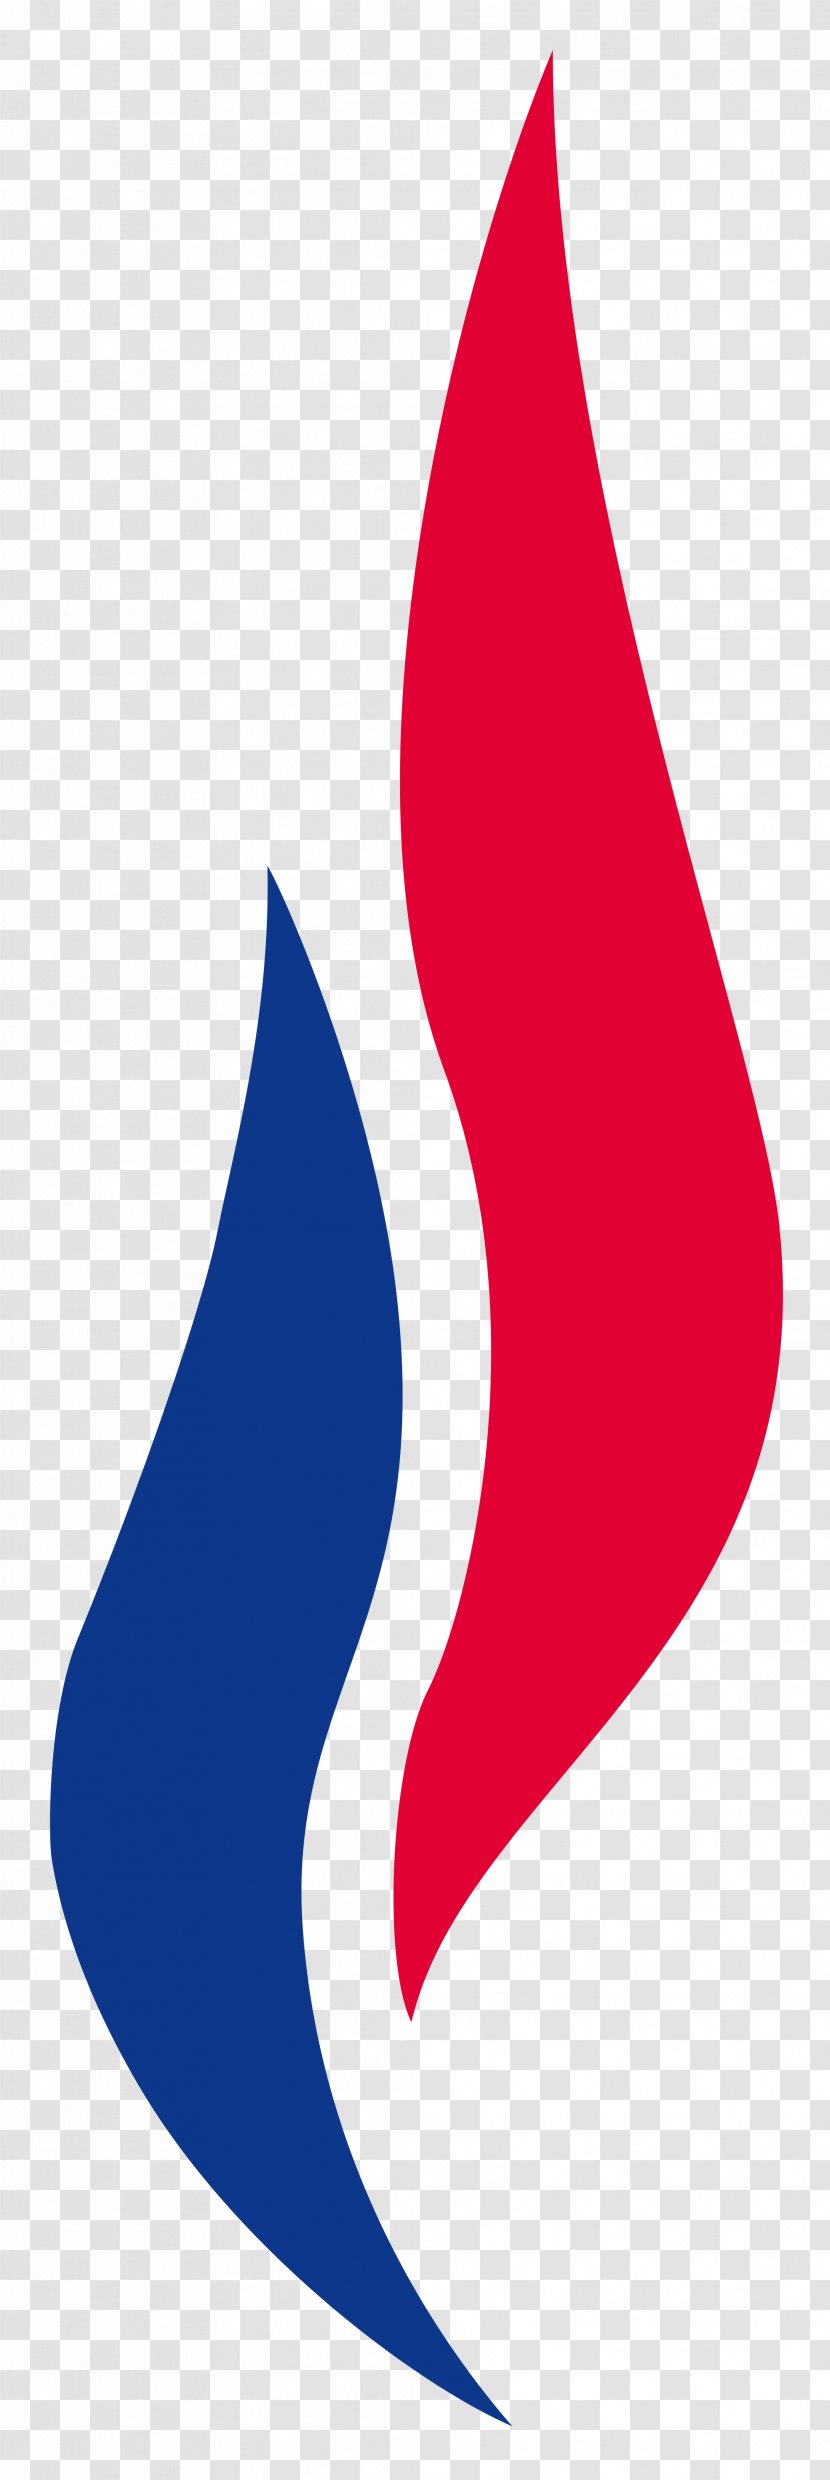 France National Front Political Party Far-right Politics Logo - Farright Transparent PNG